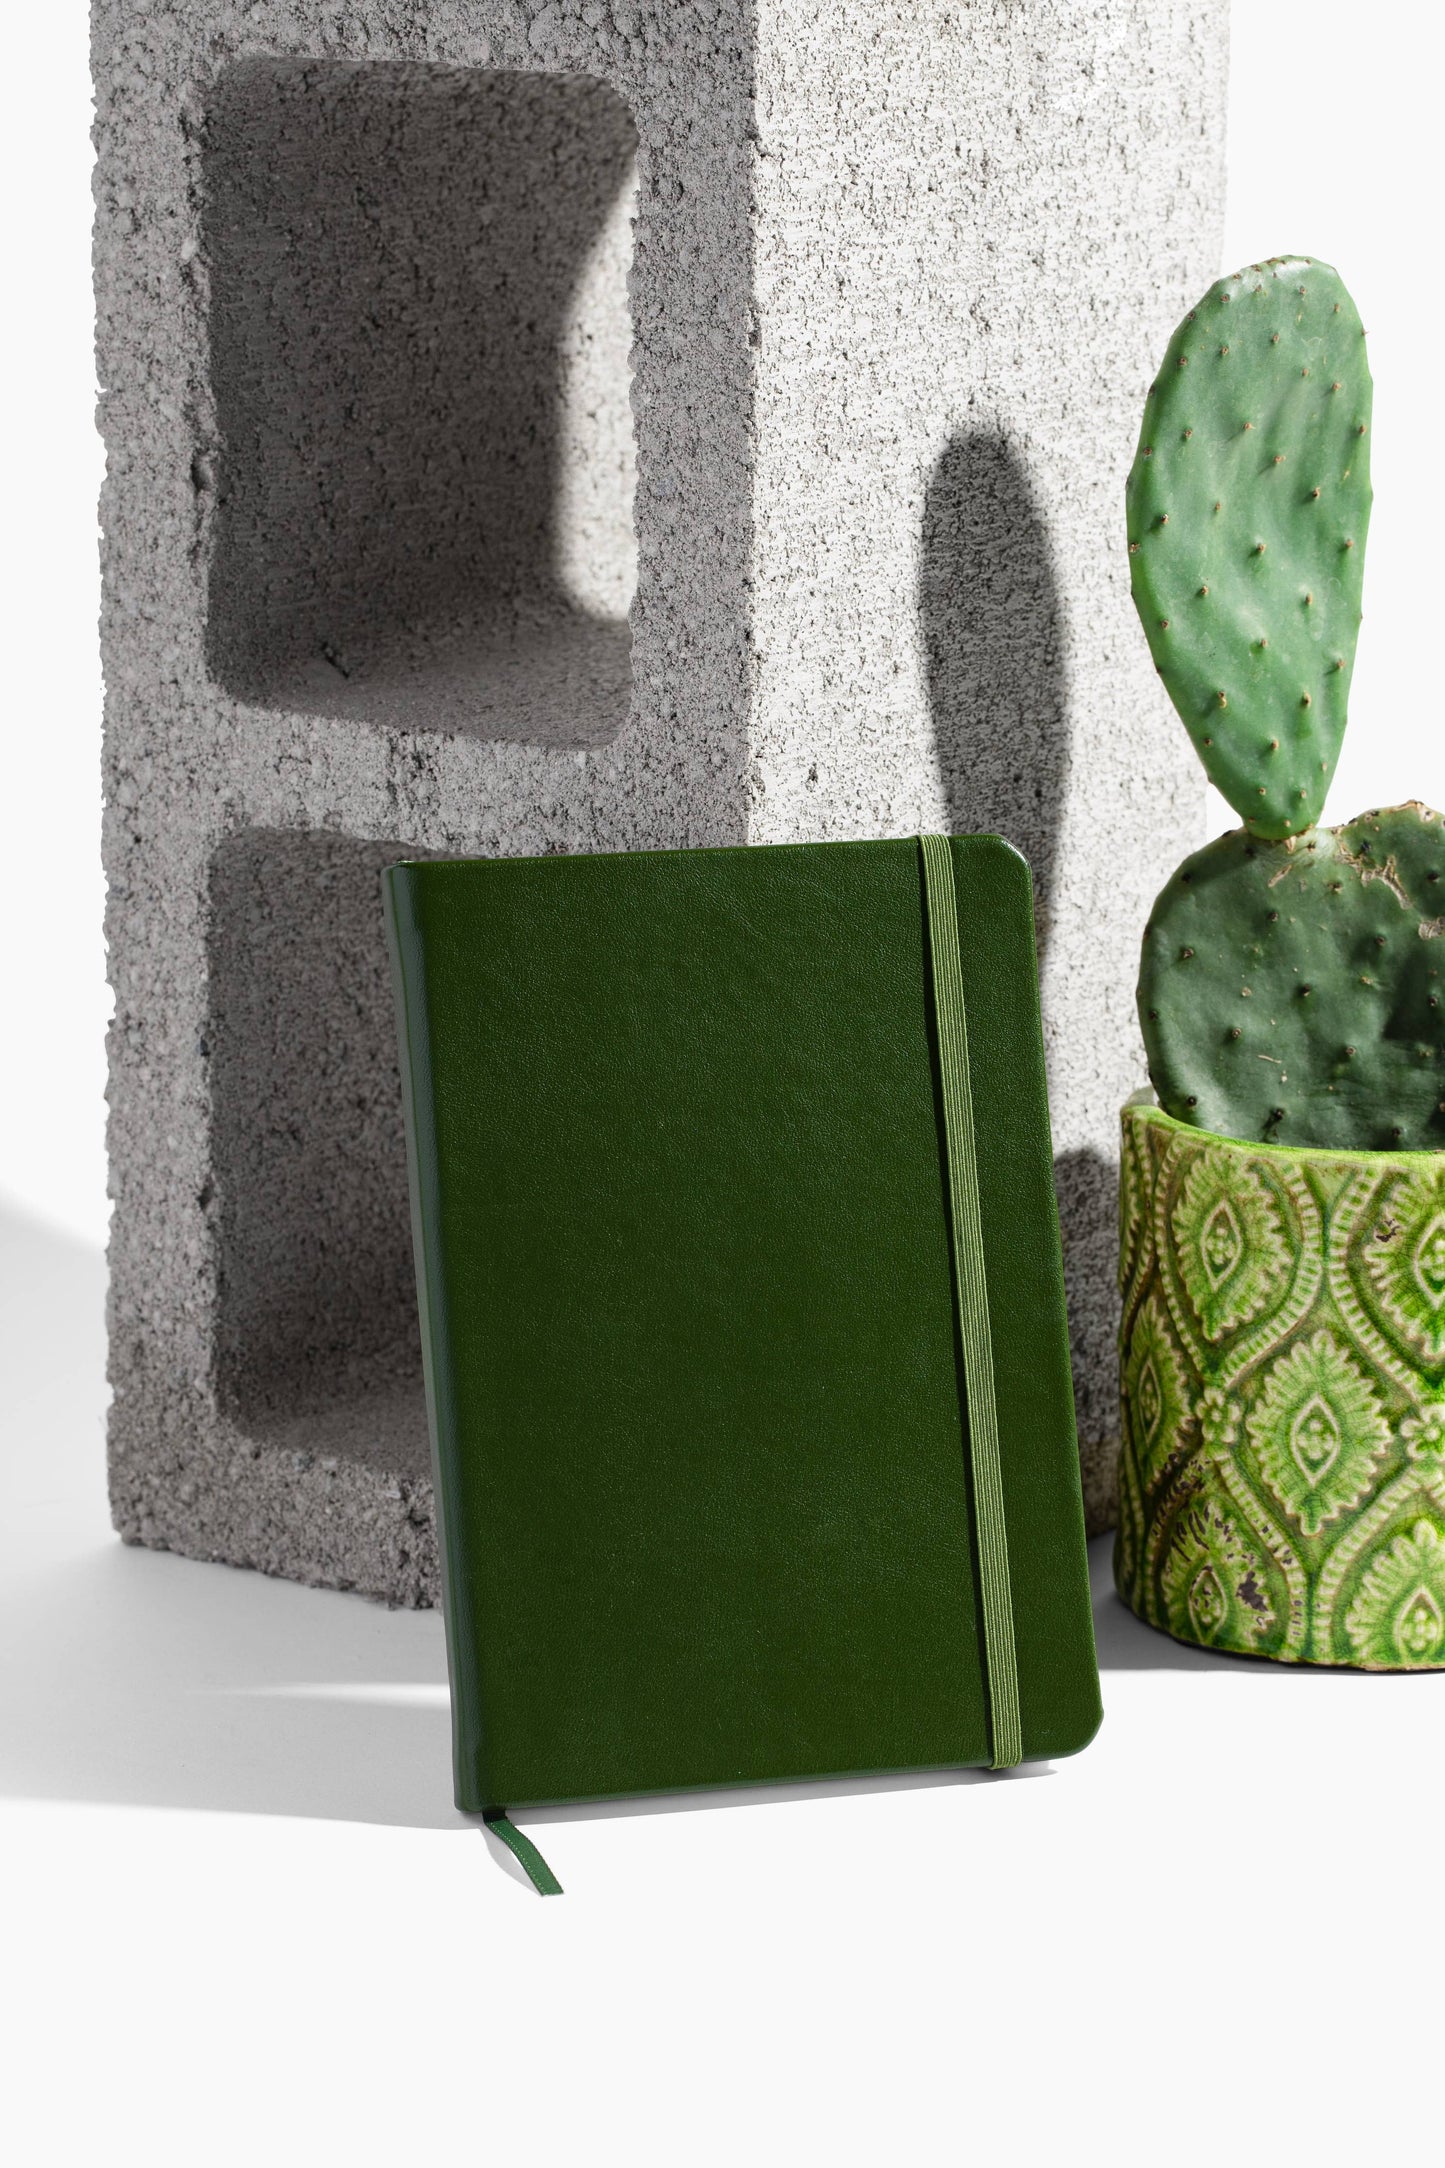 VITAL - VITAL Green Cactus Leather Lined Journal